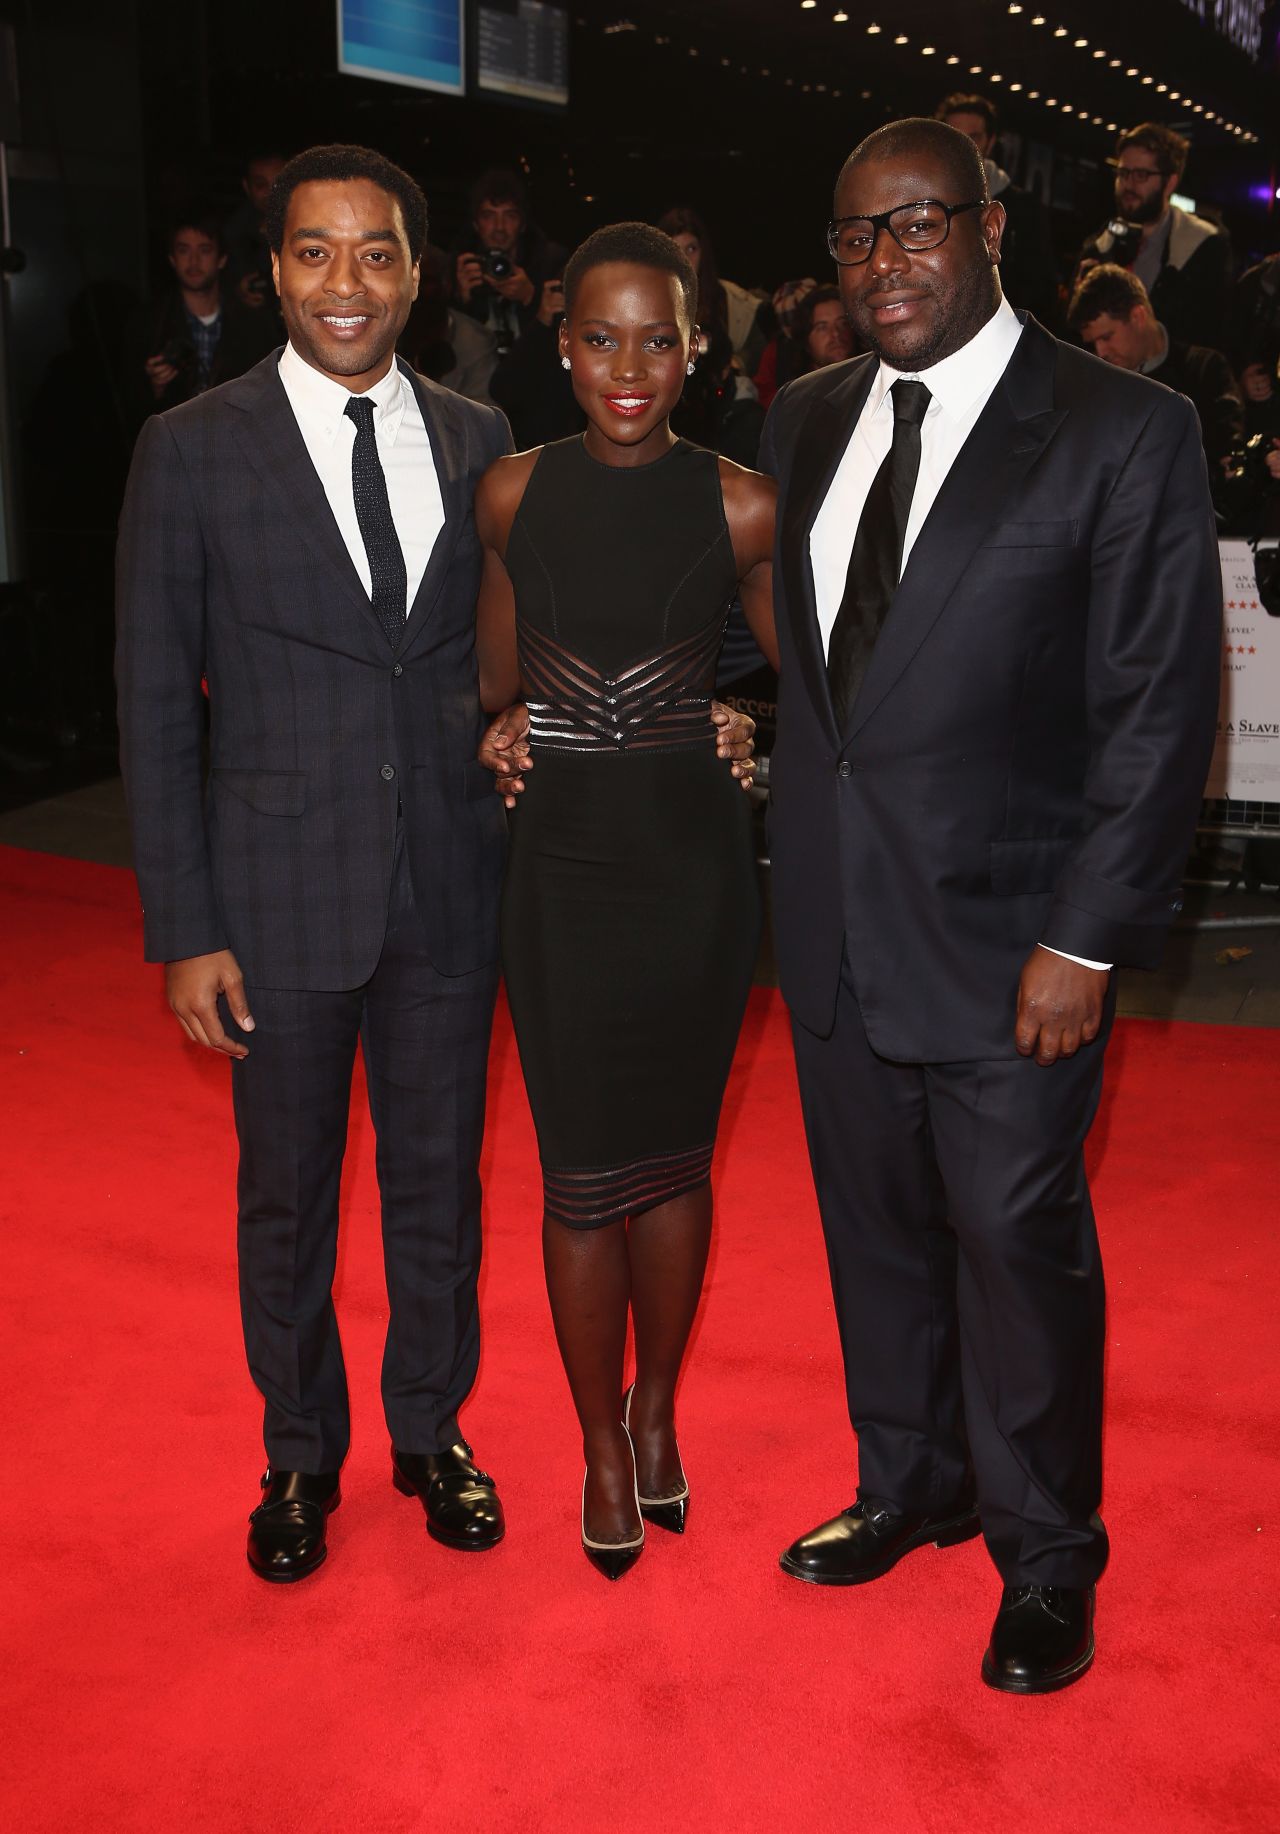 Nyong'o pictured with "12 Years" star Chiwetel Ejiofor (left) and director Steve McQueen (right) at the movie's European premiere, at the London Film Festival on October 18, 2013.